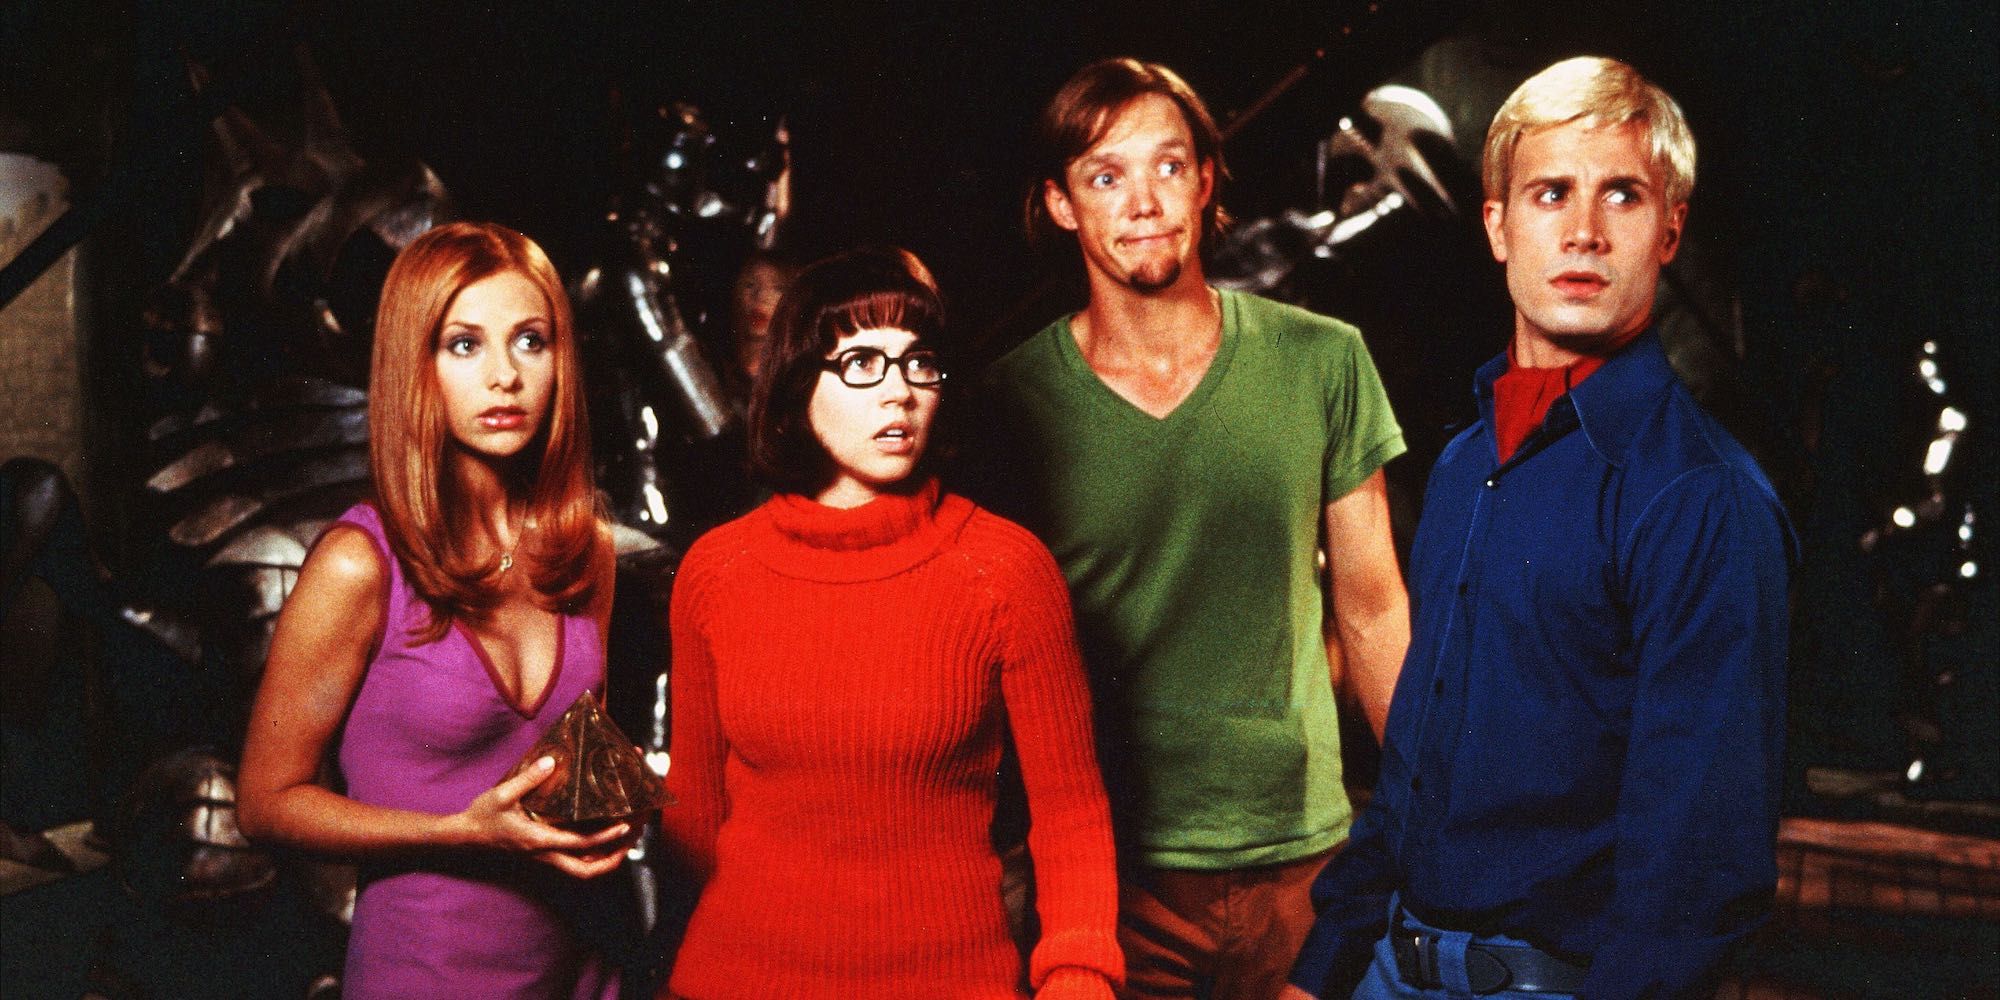 The Scooby Gang stands together in the live action Scooby-Doo movie